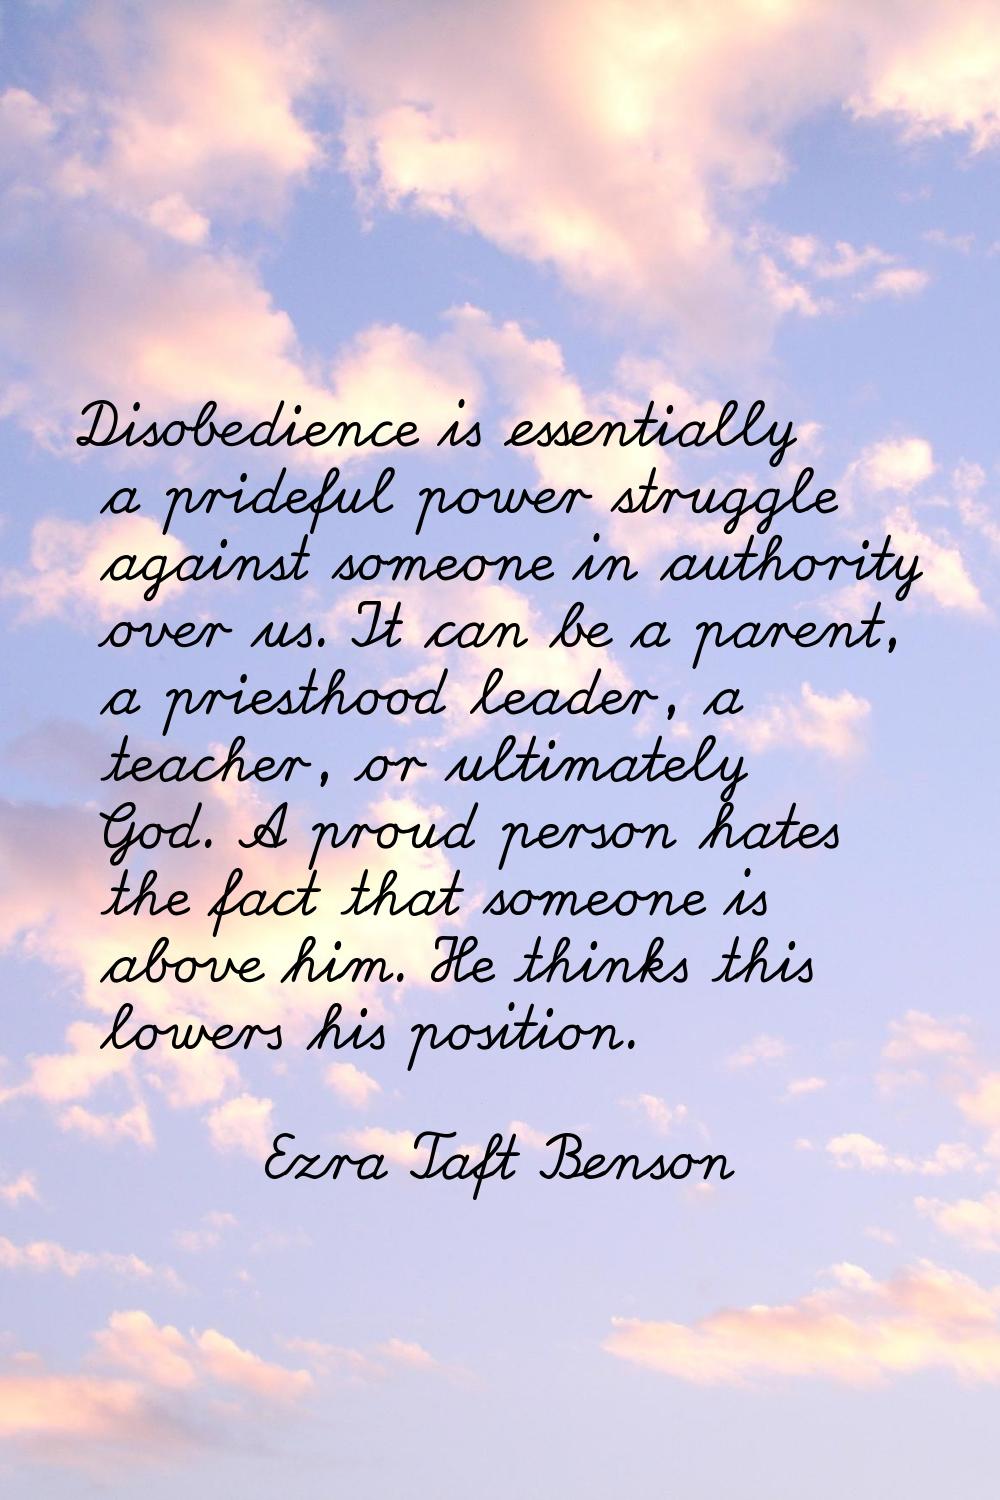 Disobedience is essentially a prideful power struggle against someone in authority over us. It can 